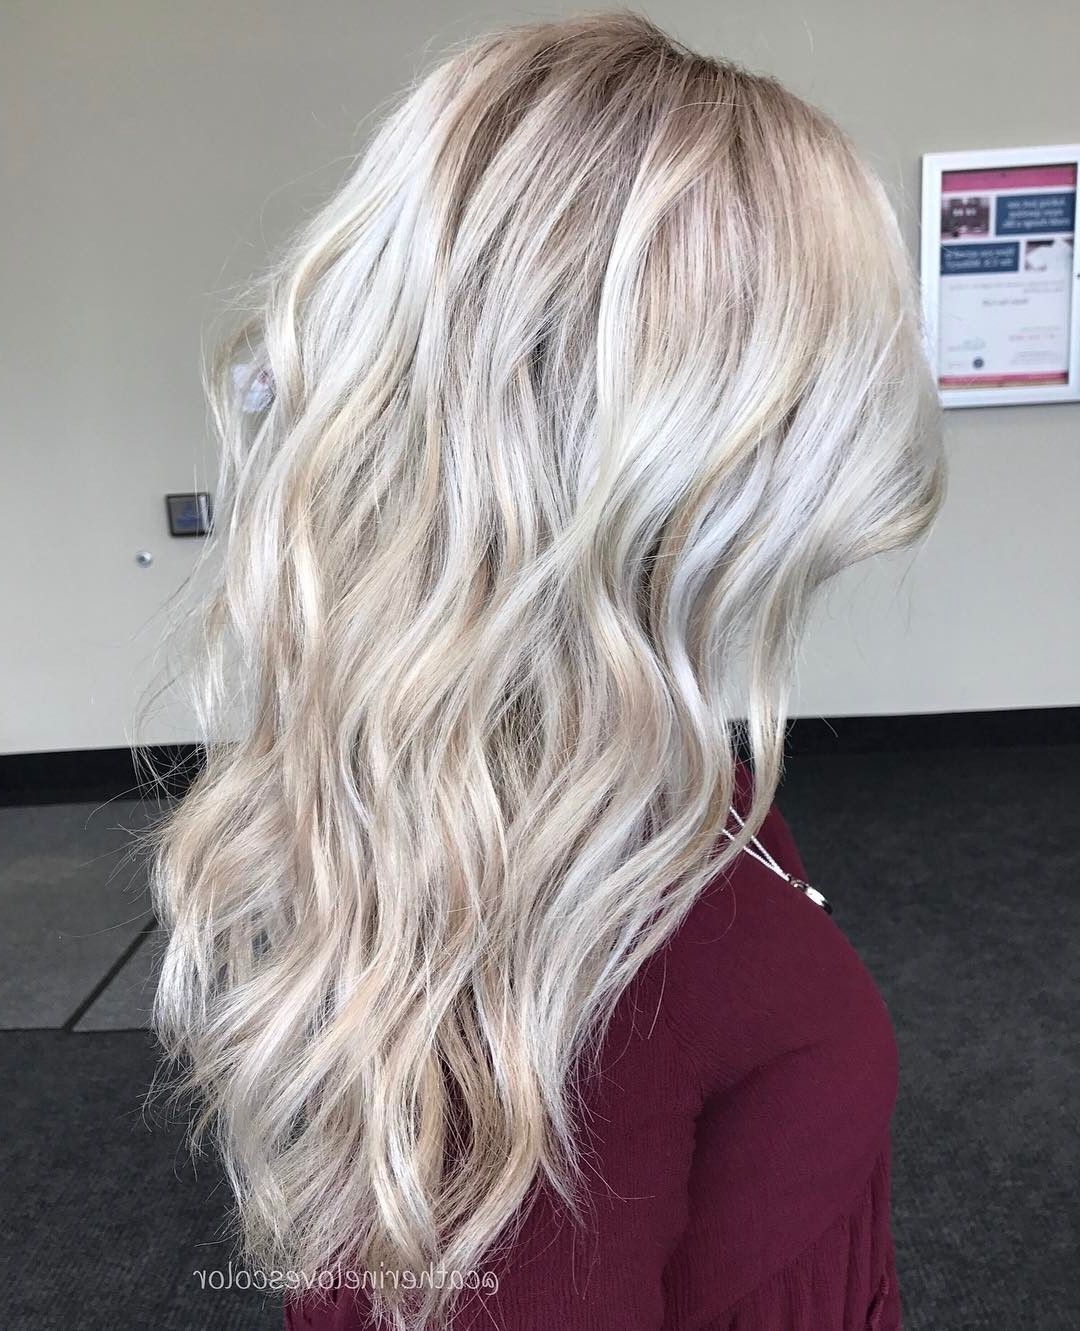 Fashionable Sleek Ash Blonde Hairstyles Intended For 20 Adorable Ash Blonde Hairstyles To Try: Hair Color Ideas 2018 (Gallery 2 of 20)